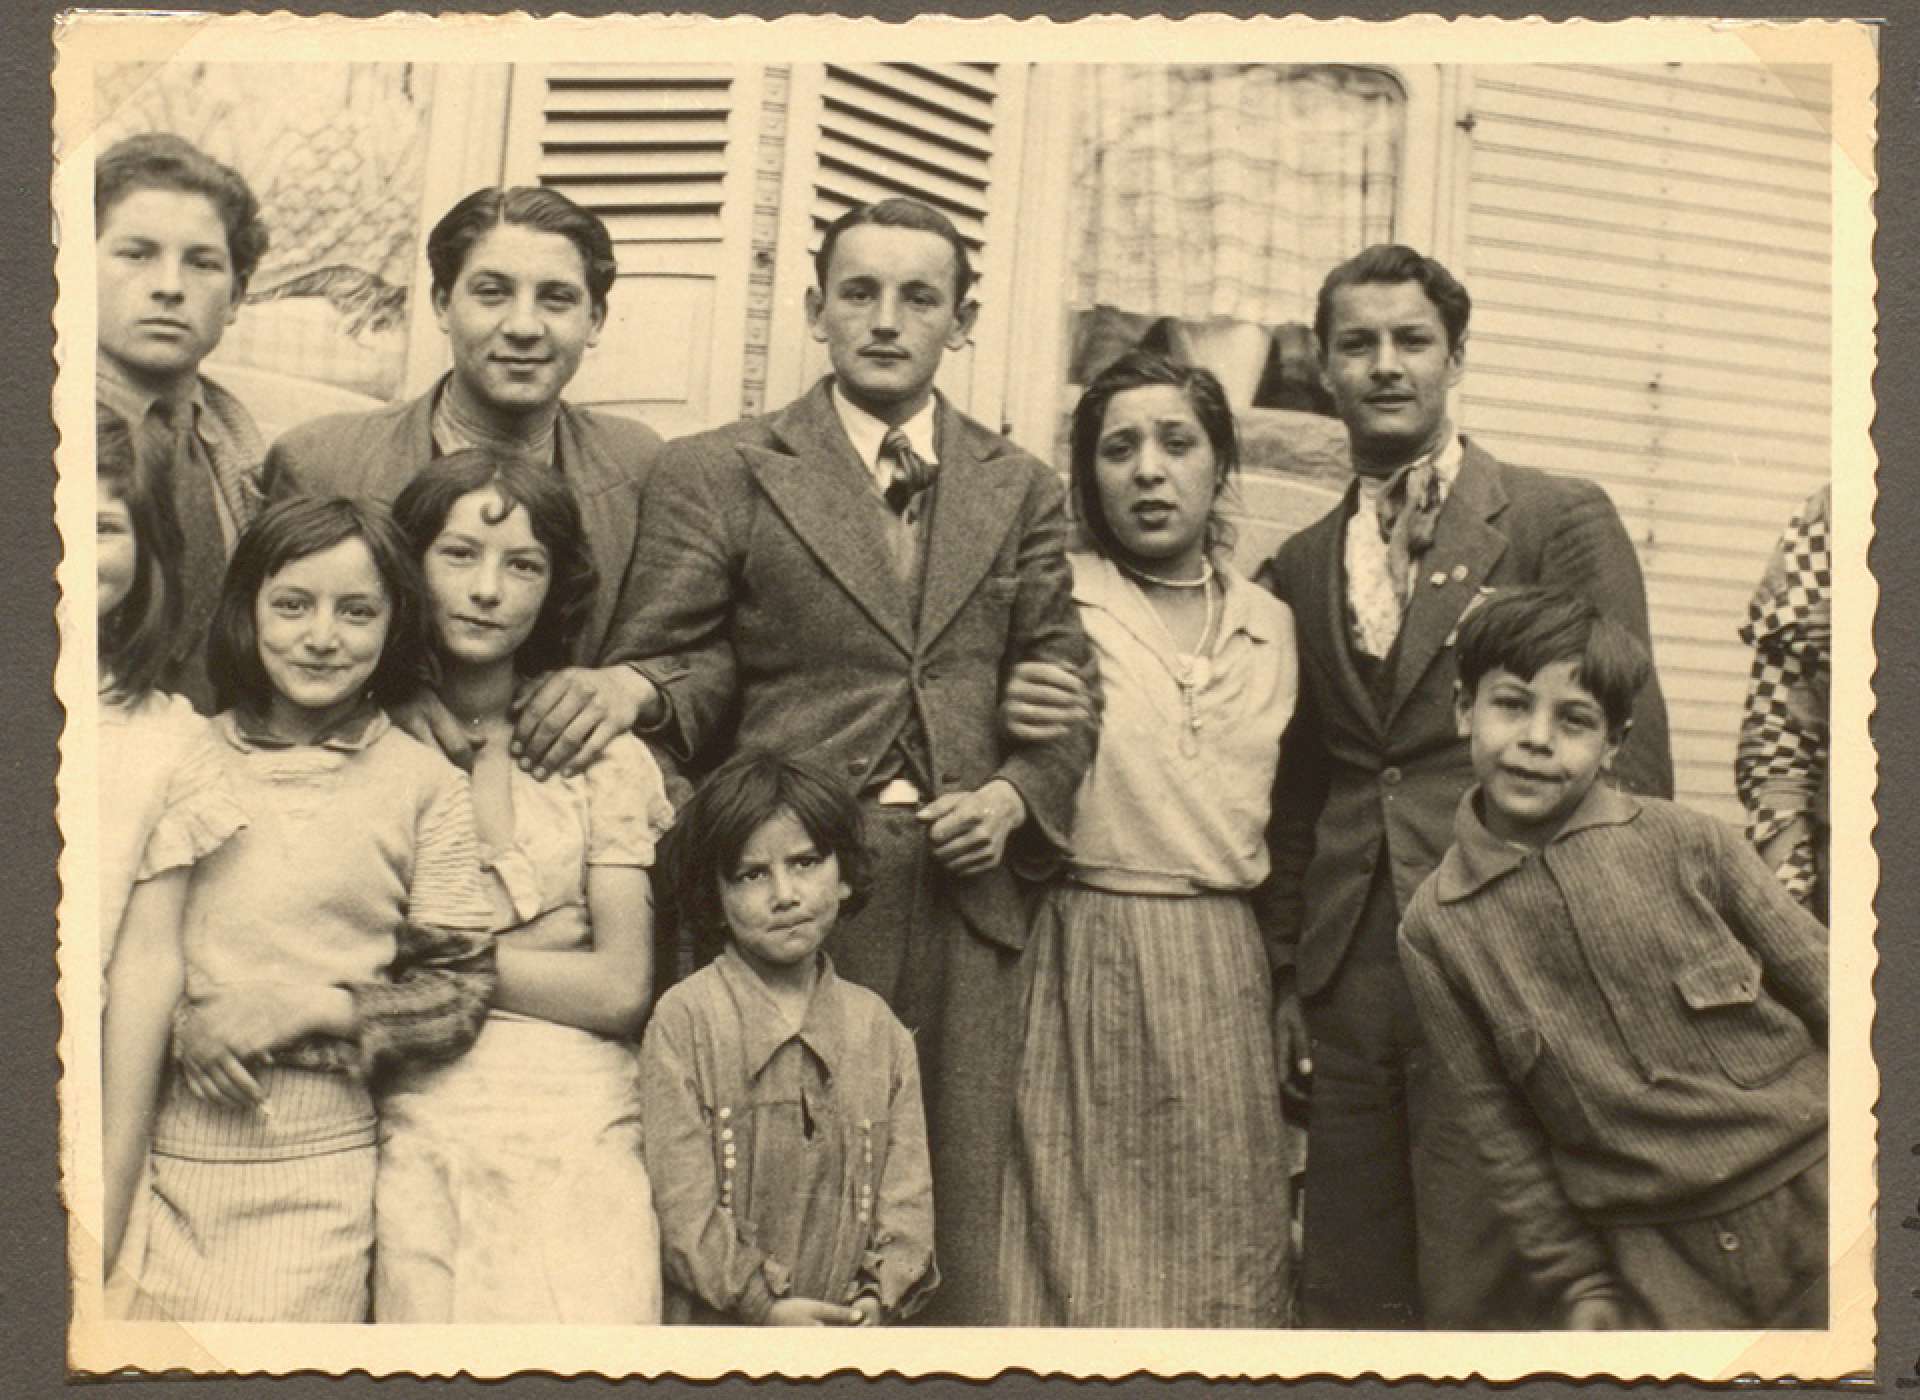 Lina Laubinger/Steinbach (centre), with her brothers and sisters in 1935. Courtesy of the University of Liverpool Library Special Collections